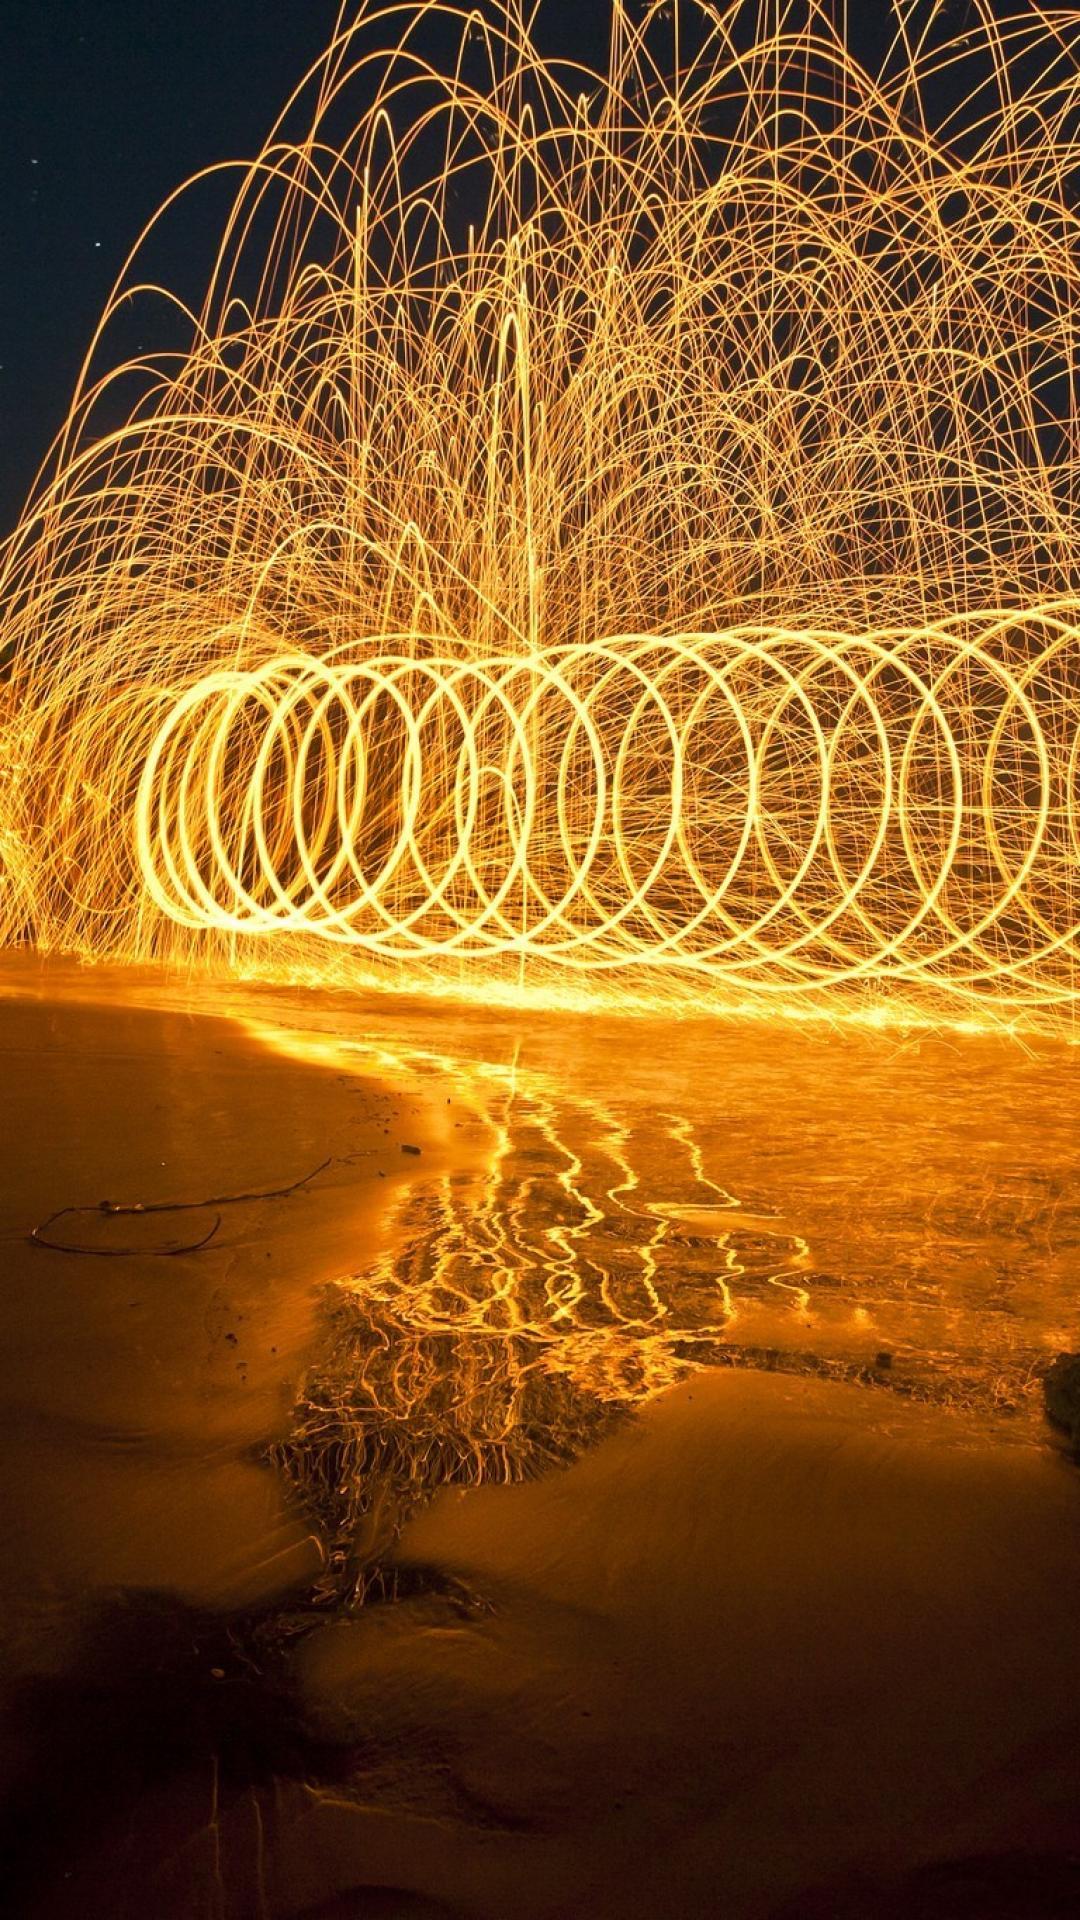 Beach night fire circles events confusion wallpaper